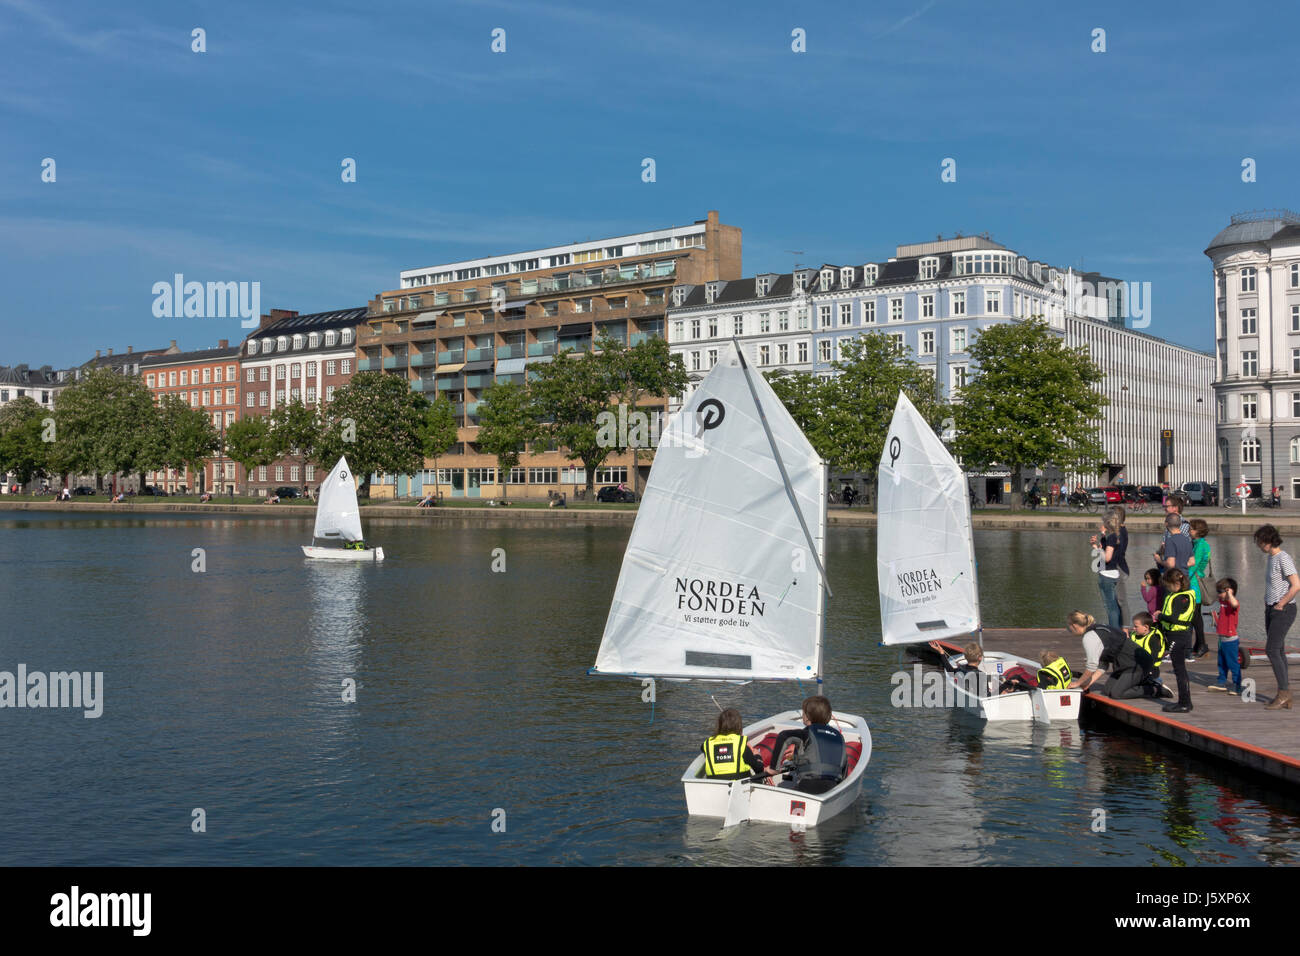 Junior sailors in optimist dinghies coached on the Peblinge Lake in central Copenhagen on a sunny afternoon in early summer. Parents on the jetty. Stock Photo